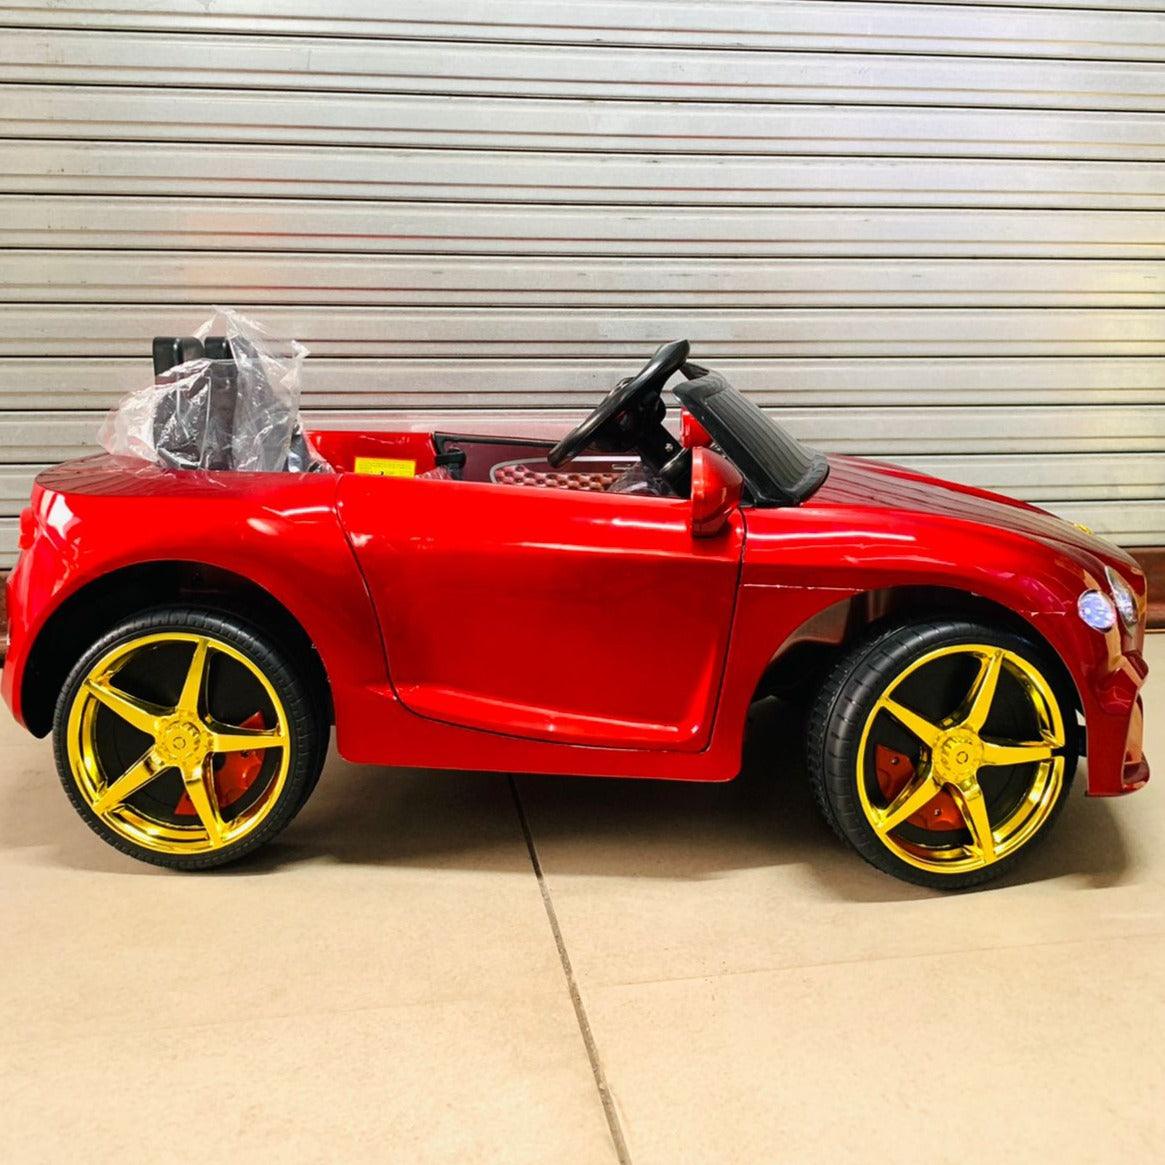 12V Bentley Ride on At-2188 Car for Kids with Nonslip tires | Automatic brake, Remote & Manual Drive - 11Cart